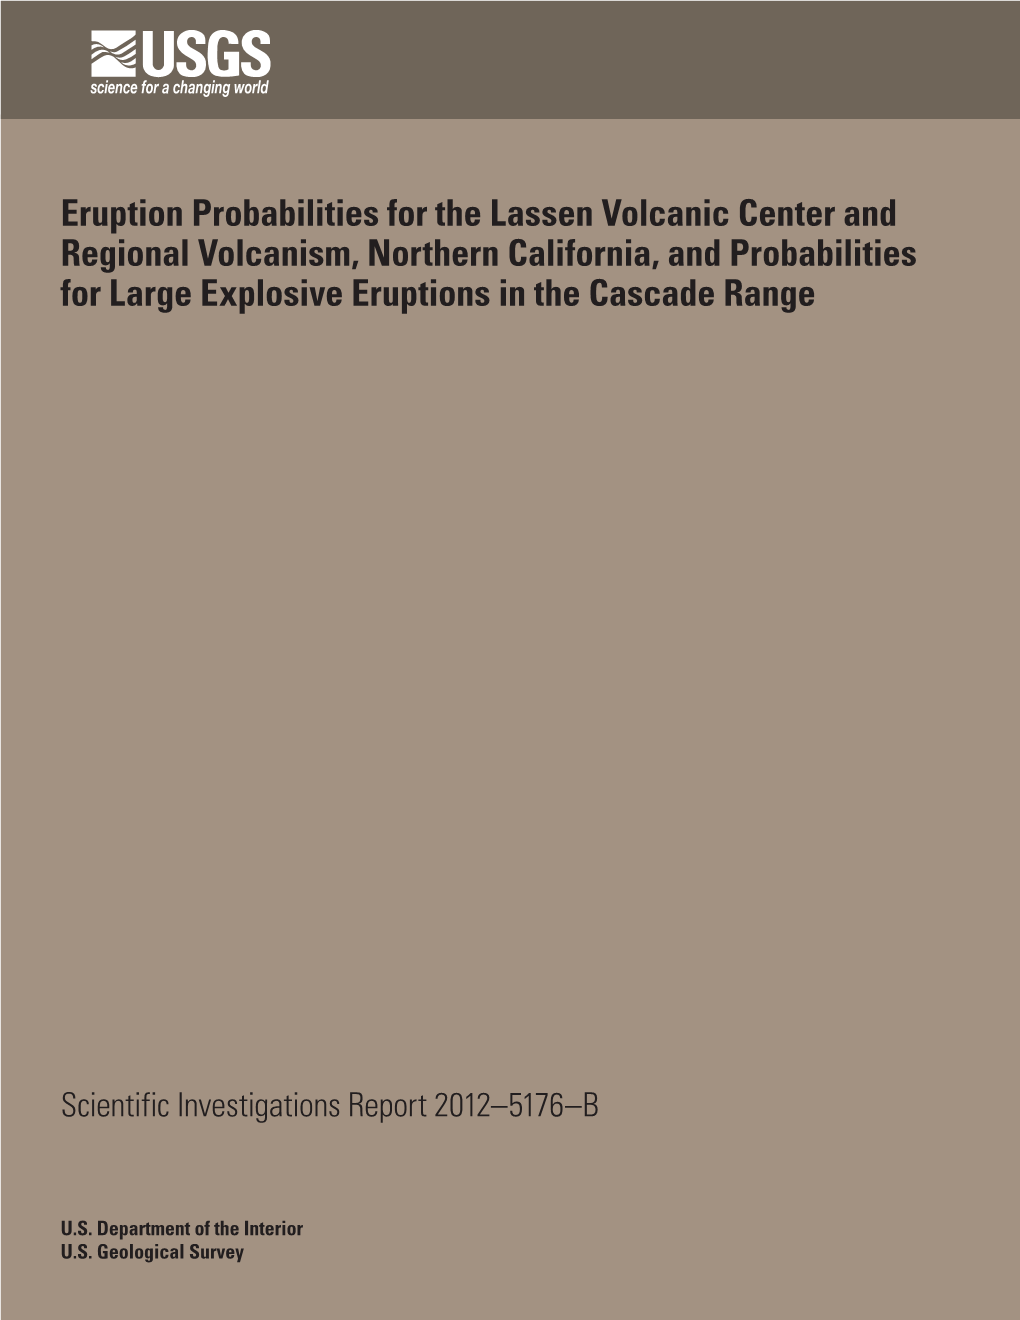 Eruption Probabilities for the Lassen Volcanic Center and Regional